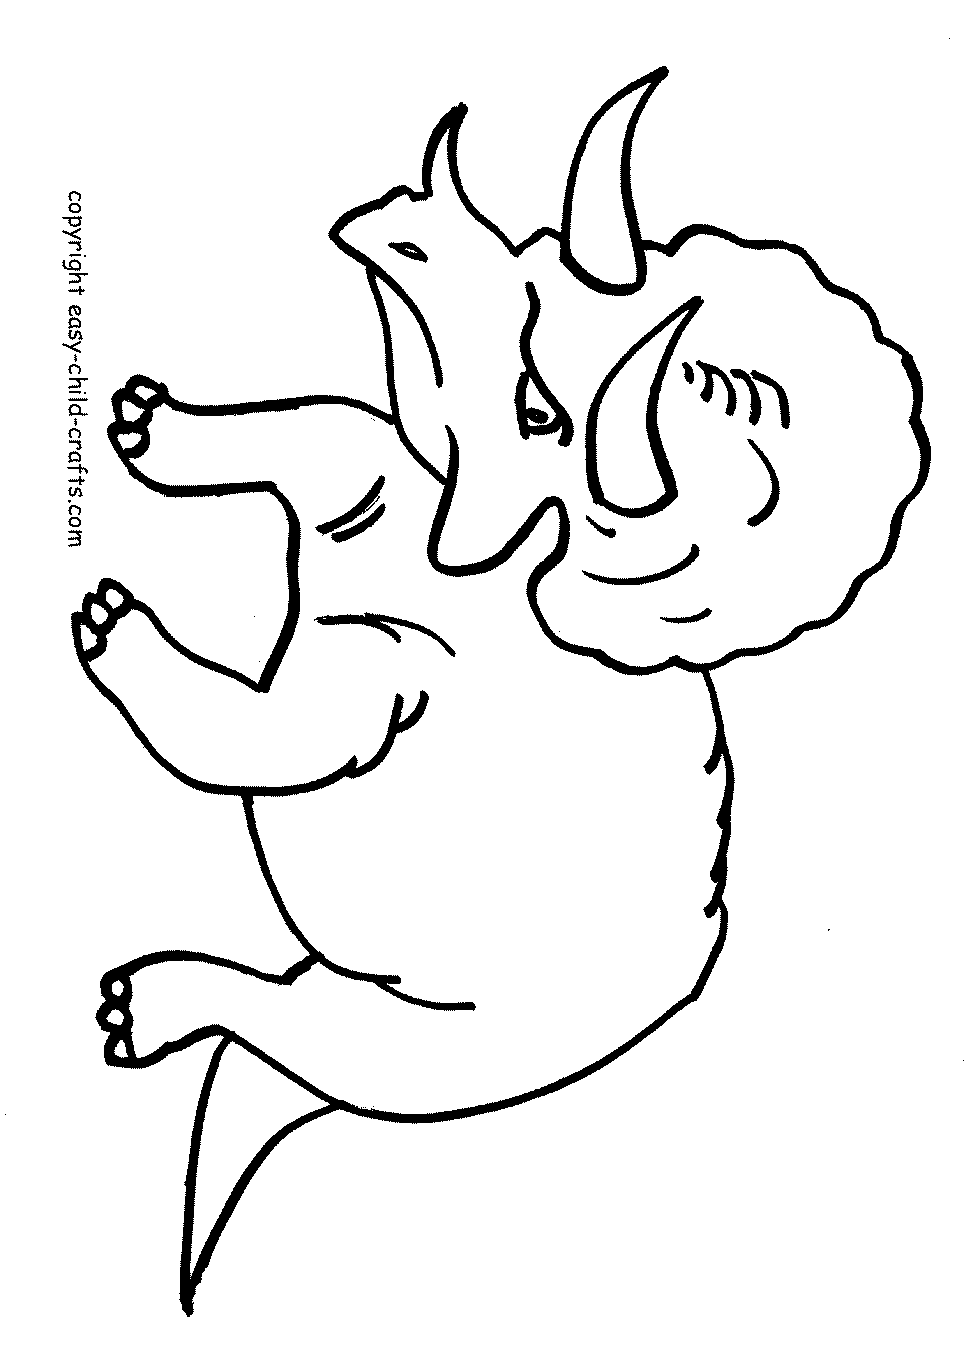 Download Printable Coloring Pages: Dinosaur Coloring Pages